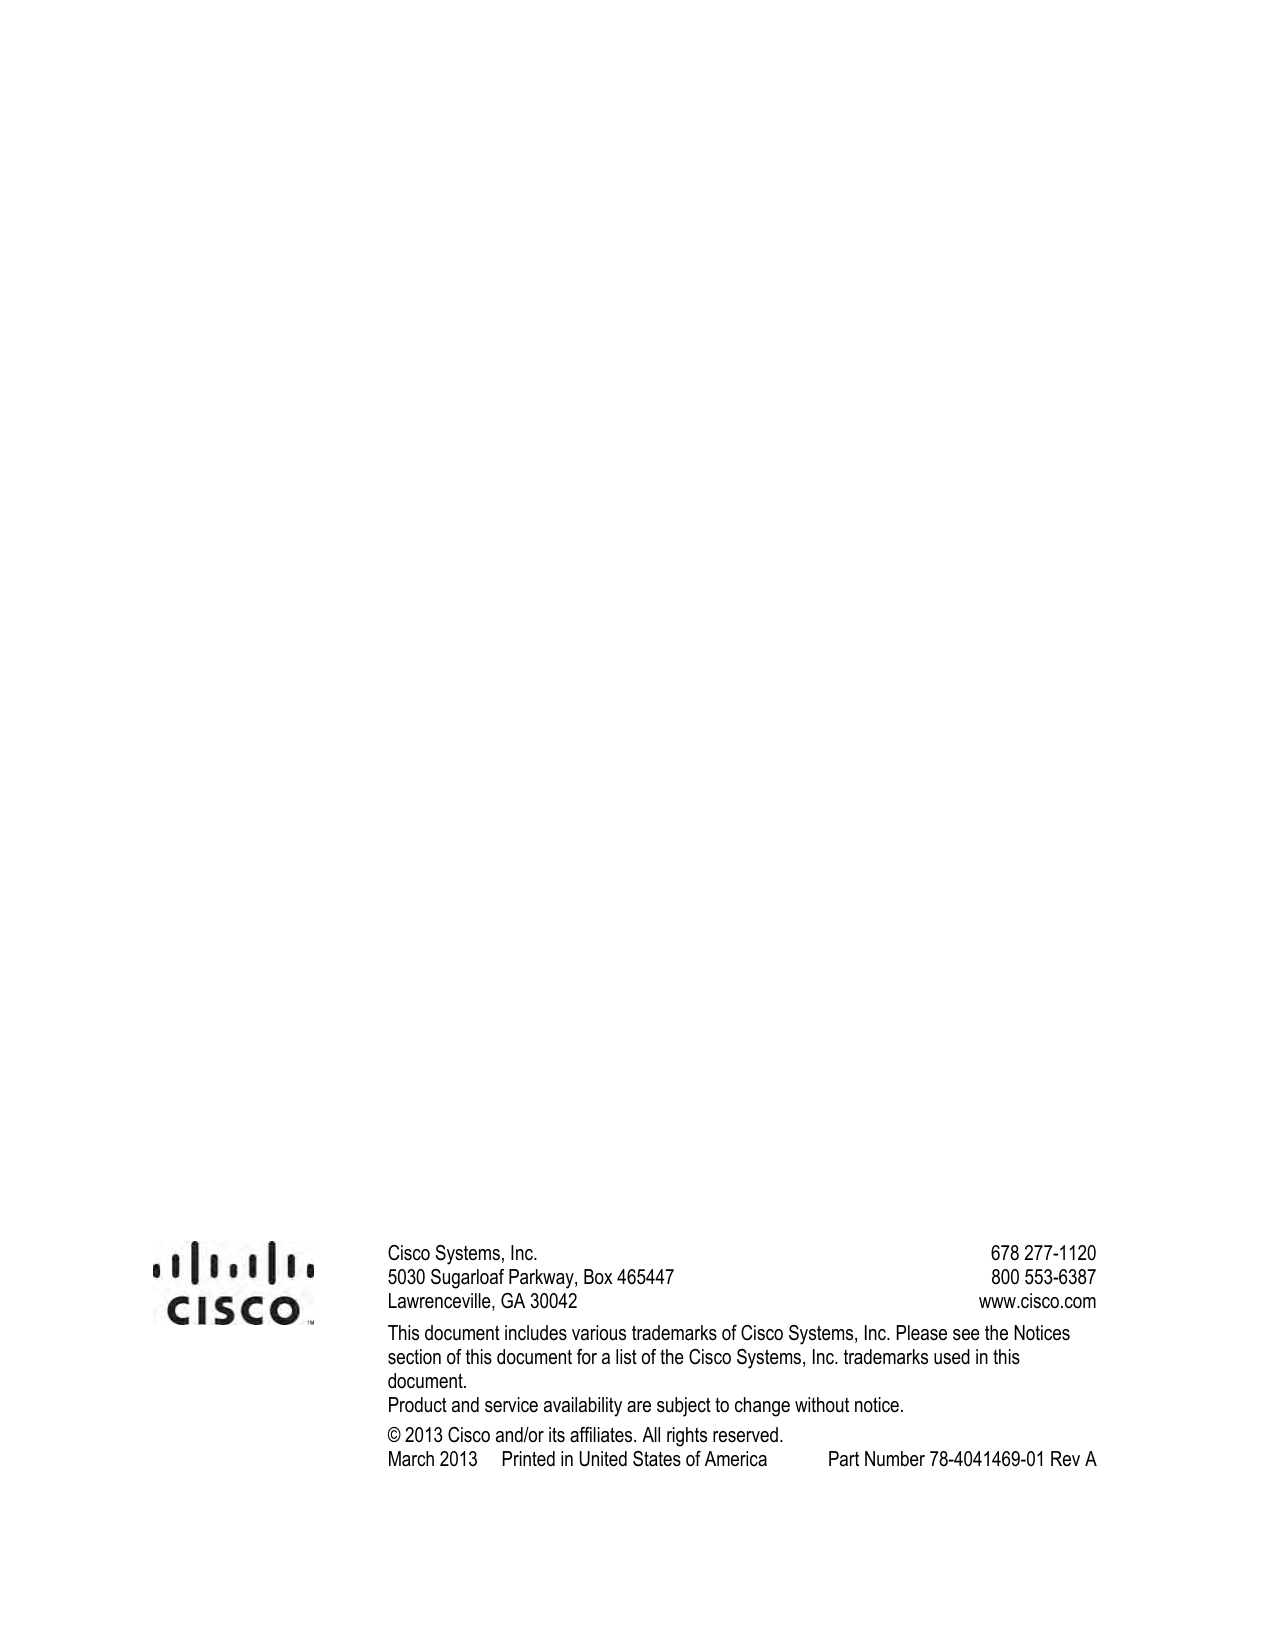                             Cisco Systems, Inc.  5030 Sugarloaf Parkway, Box 465447 Lawrenceville, GA 30042    678 277-1120 800 553-6387  www.cisco.com This document includes various trademarks of Cisco Systems, Inc. Please see the Notices section of this document for a list of the Cisco Systems, Inc. trademarks used in this document. Product and service availability are subject to change without notice. © 2013 Cisco and/or its affiliates. All rights reserved. March 2013     Printed in United States of America   Part Number 78-4041469-01 Rev A   